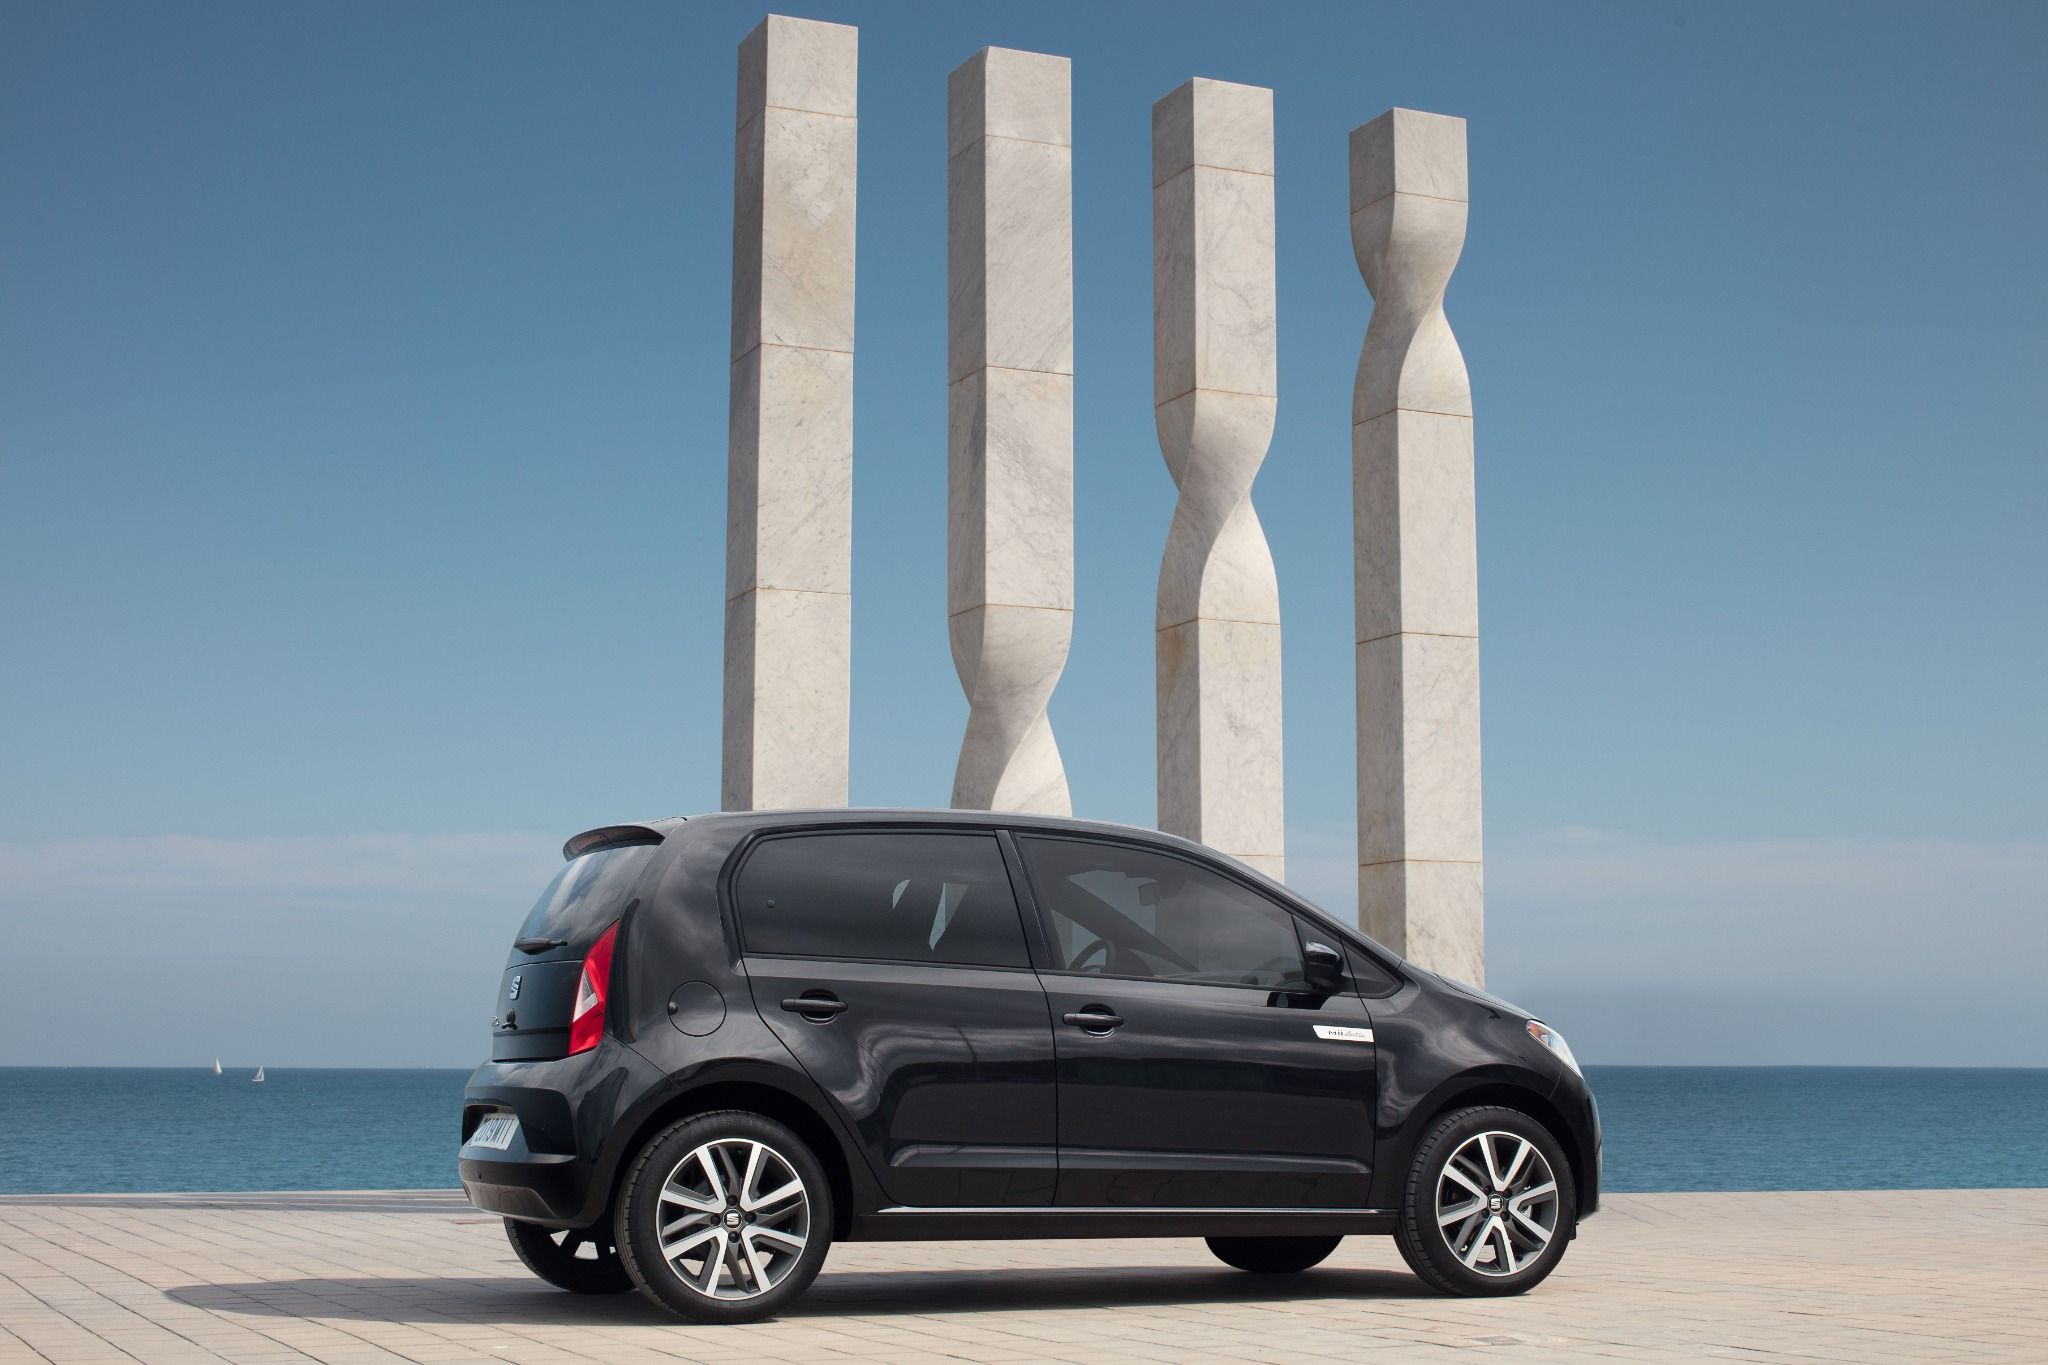 Side view of a seat mii parked on a beach next to pillars